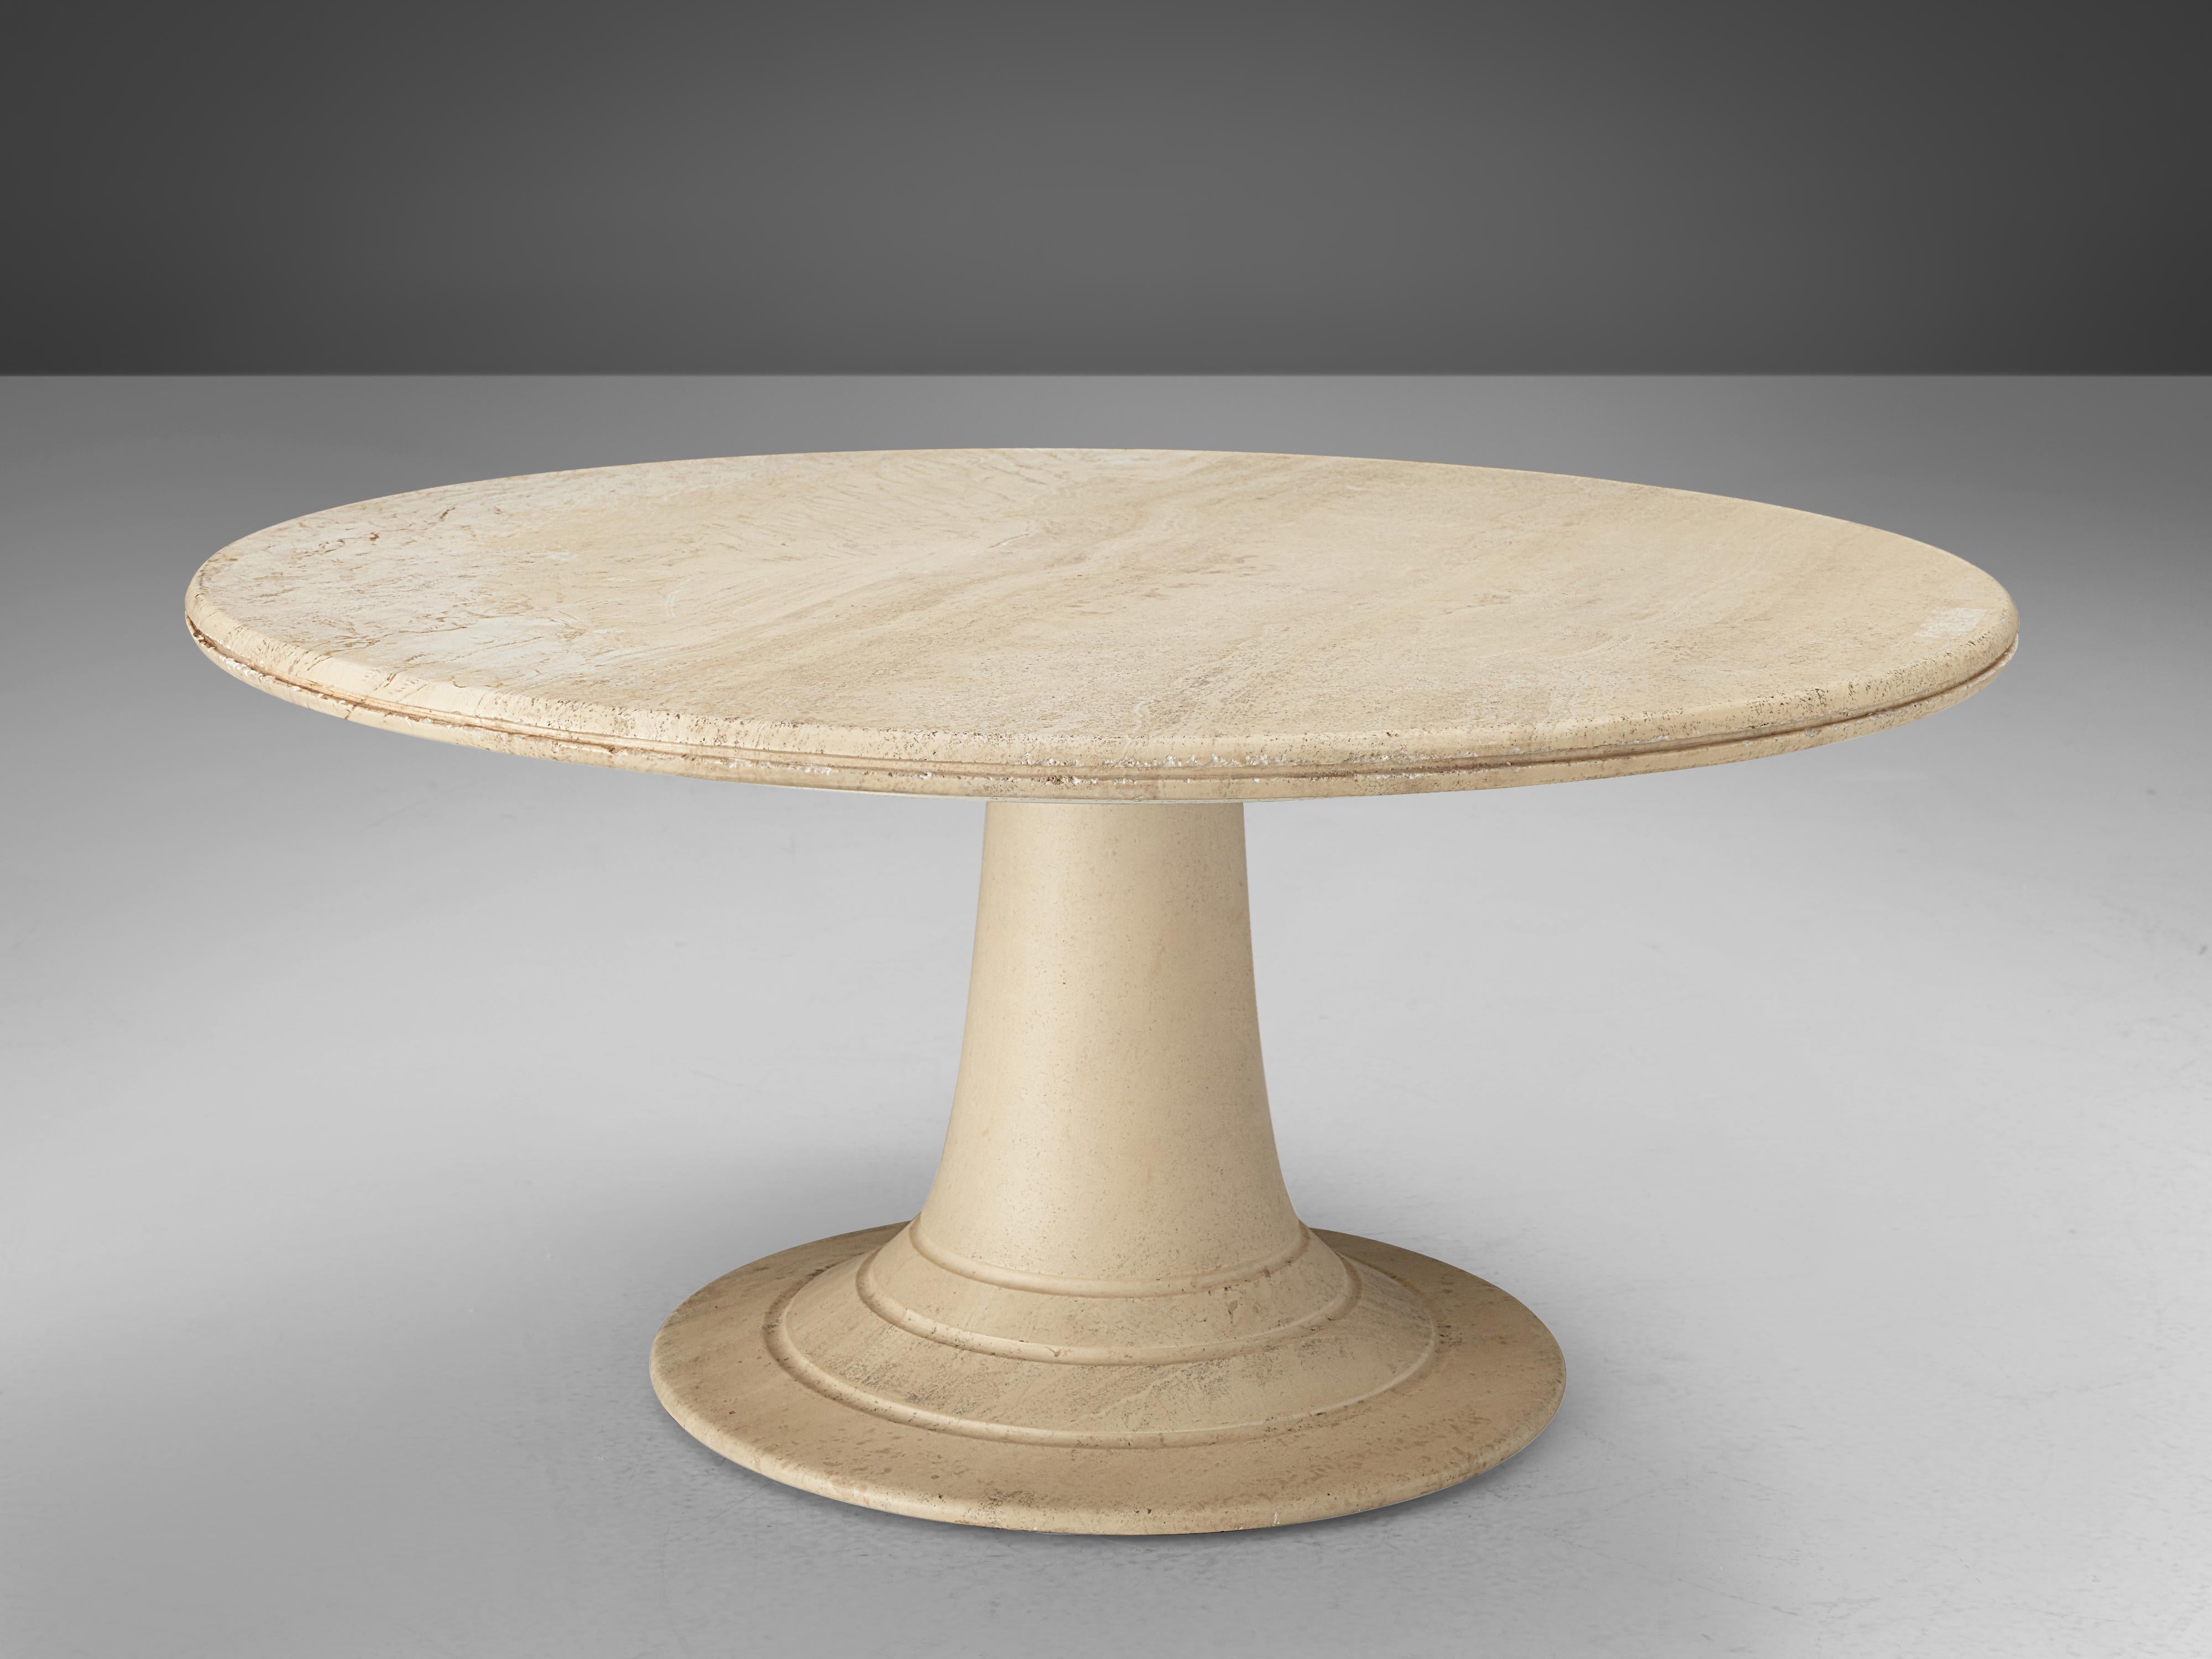 Coffee table, travertine, Europe, 1970s

Beautiful coffee table completely executed in travertine. The base consists of a round pedestal that gets wider towards the base to which it seems to float over. The base itself is highlighted with three